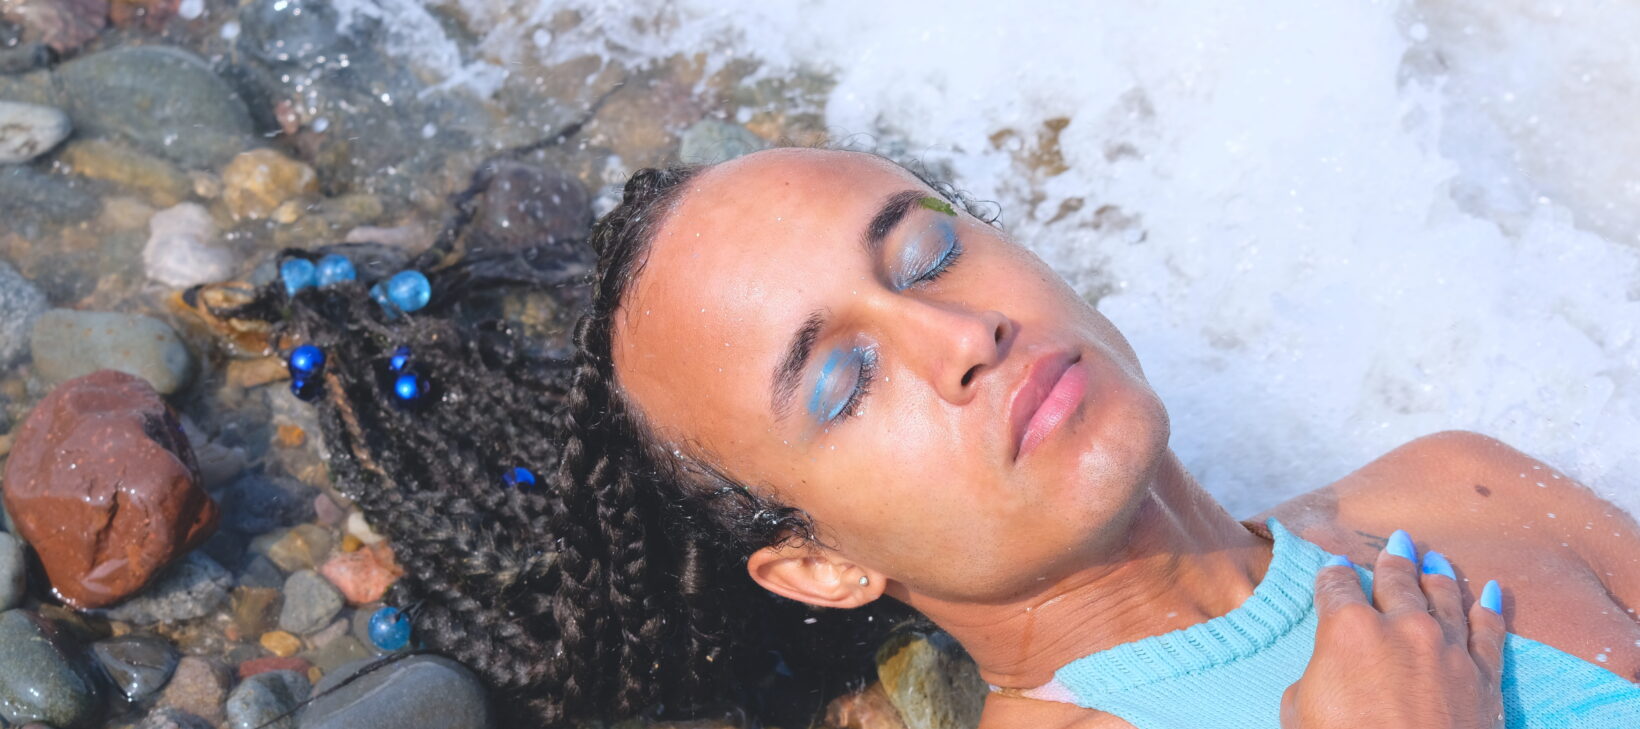 A film still of someone wearing a light blue top, lying on some rocks by the ocean.